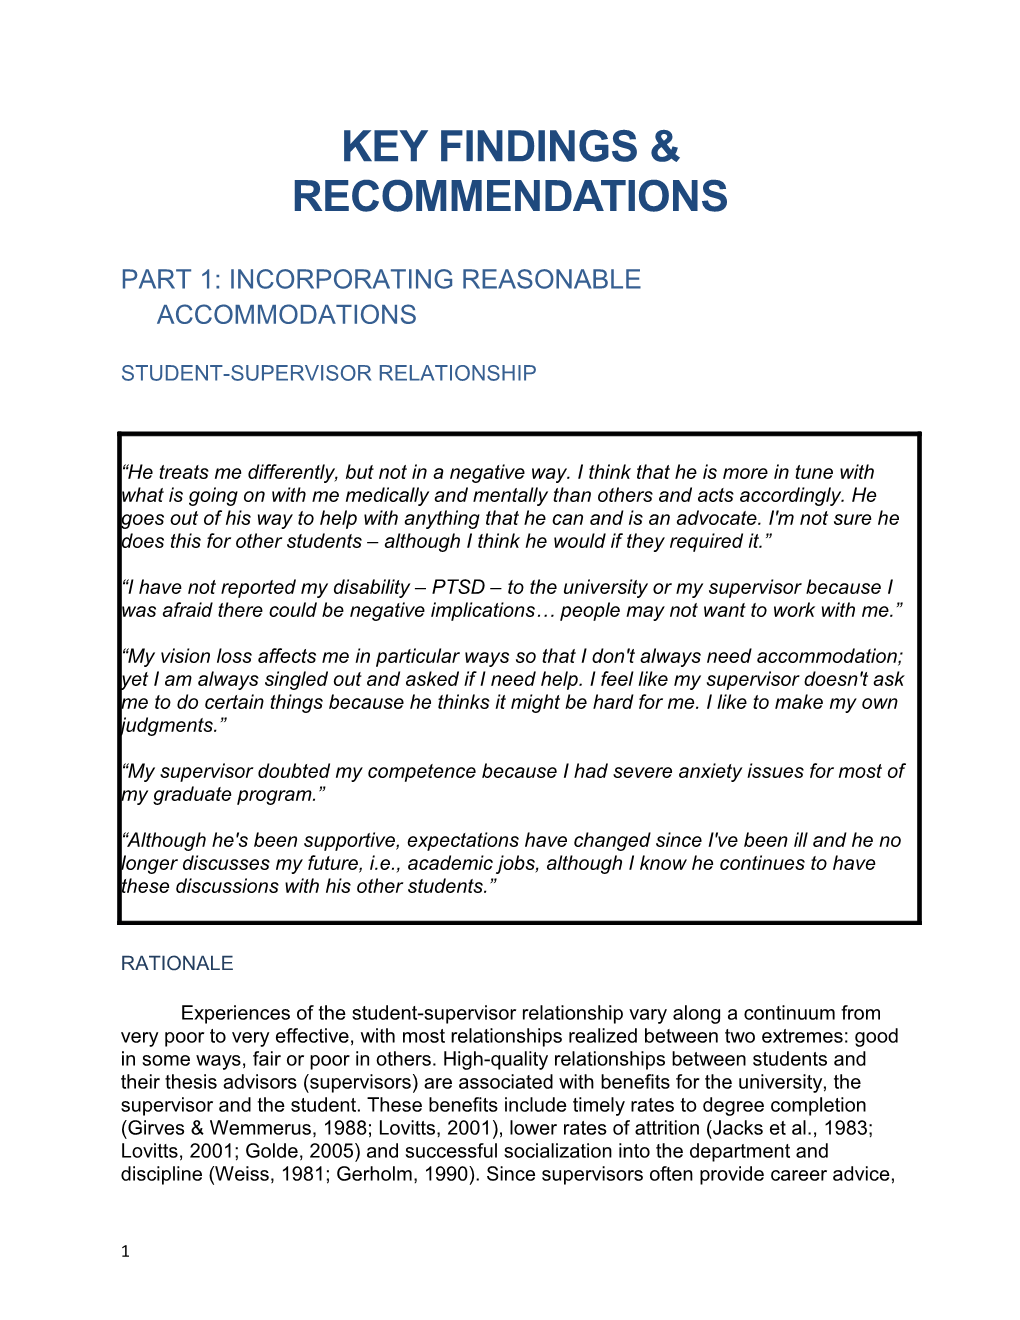 Part 1: Incorporating Reasonable Accommodations